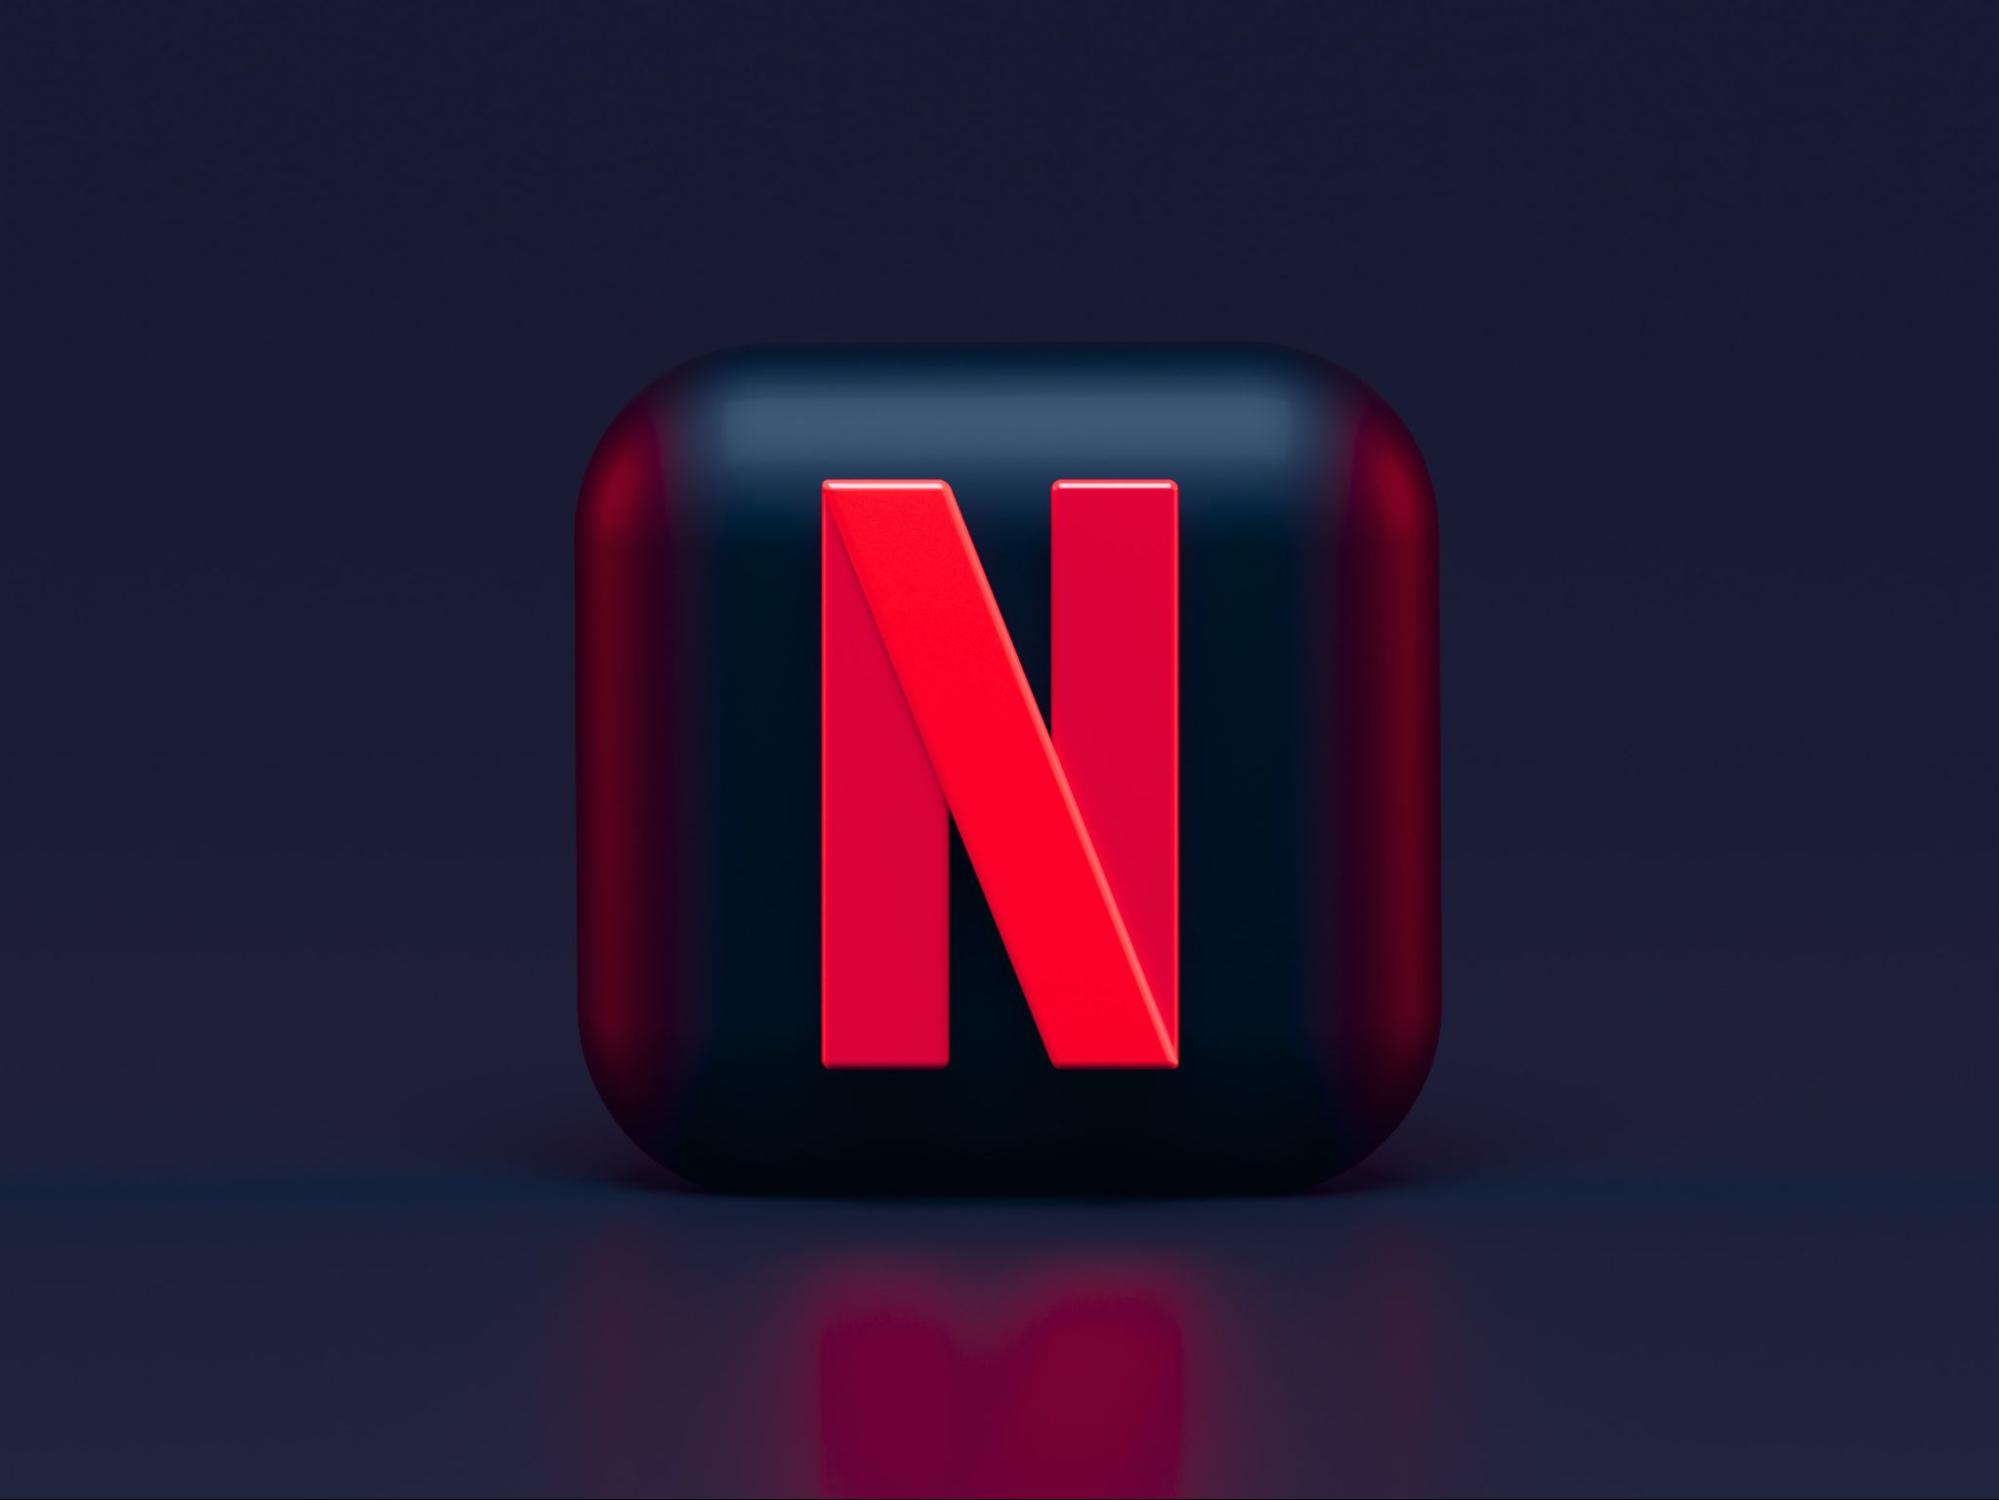 Netflix Faces Backlash After Cracking Down on Password Sharing